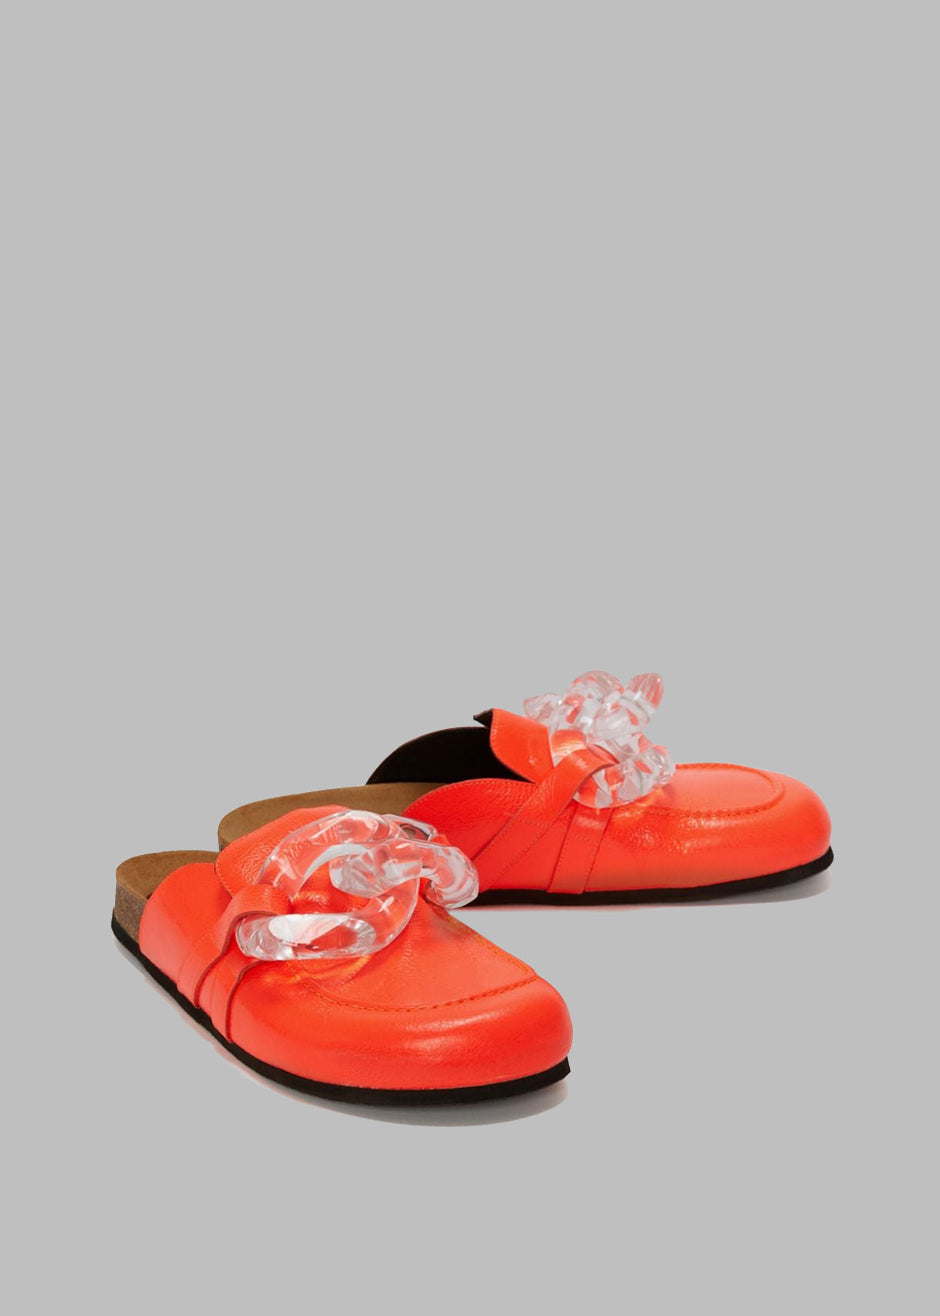 JW Anderson Chain Loafer Mules - Orange